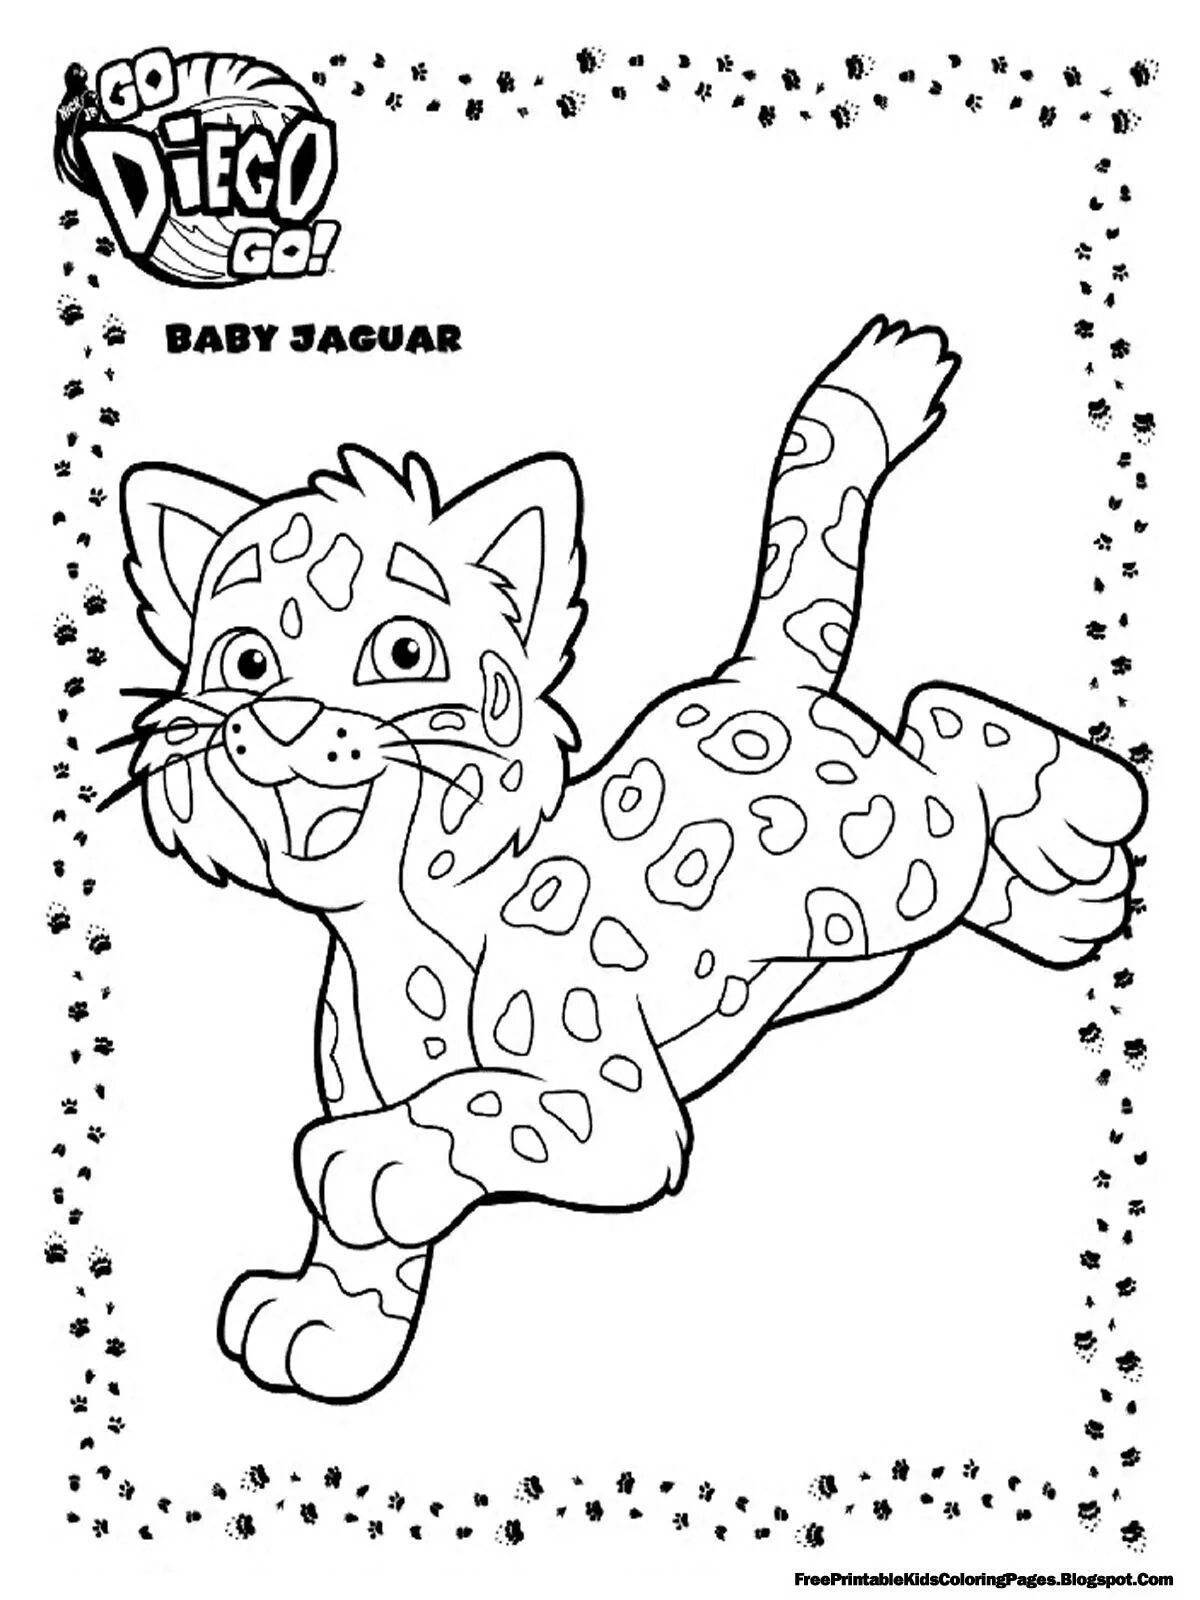 Coloring book shiny leopard